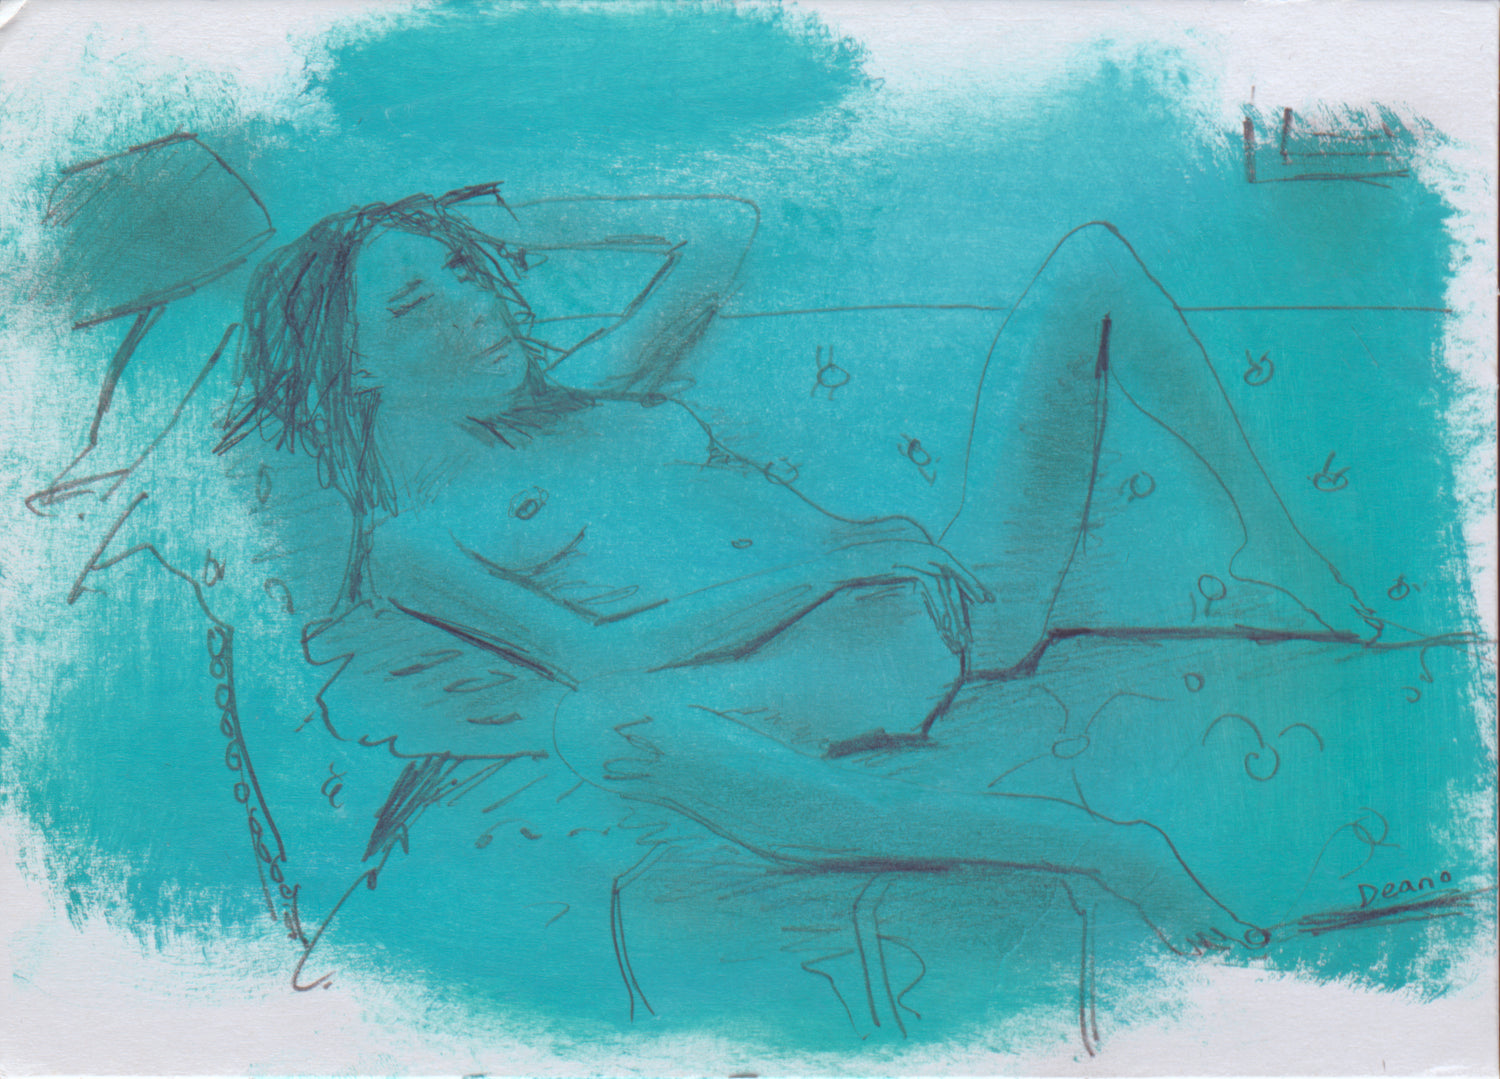 A small pencil sketch lays over a dash of oil paint, depicting a naked woman in blue hues.